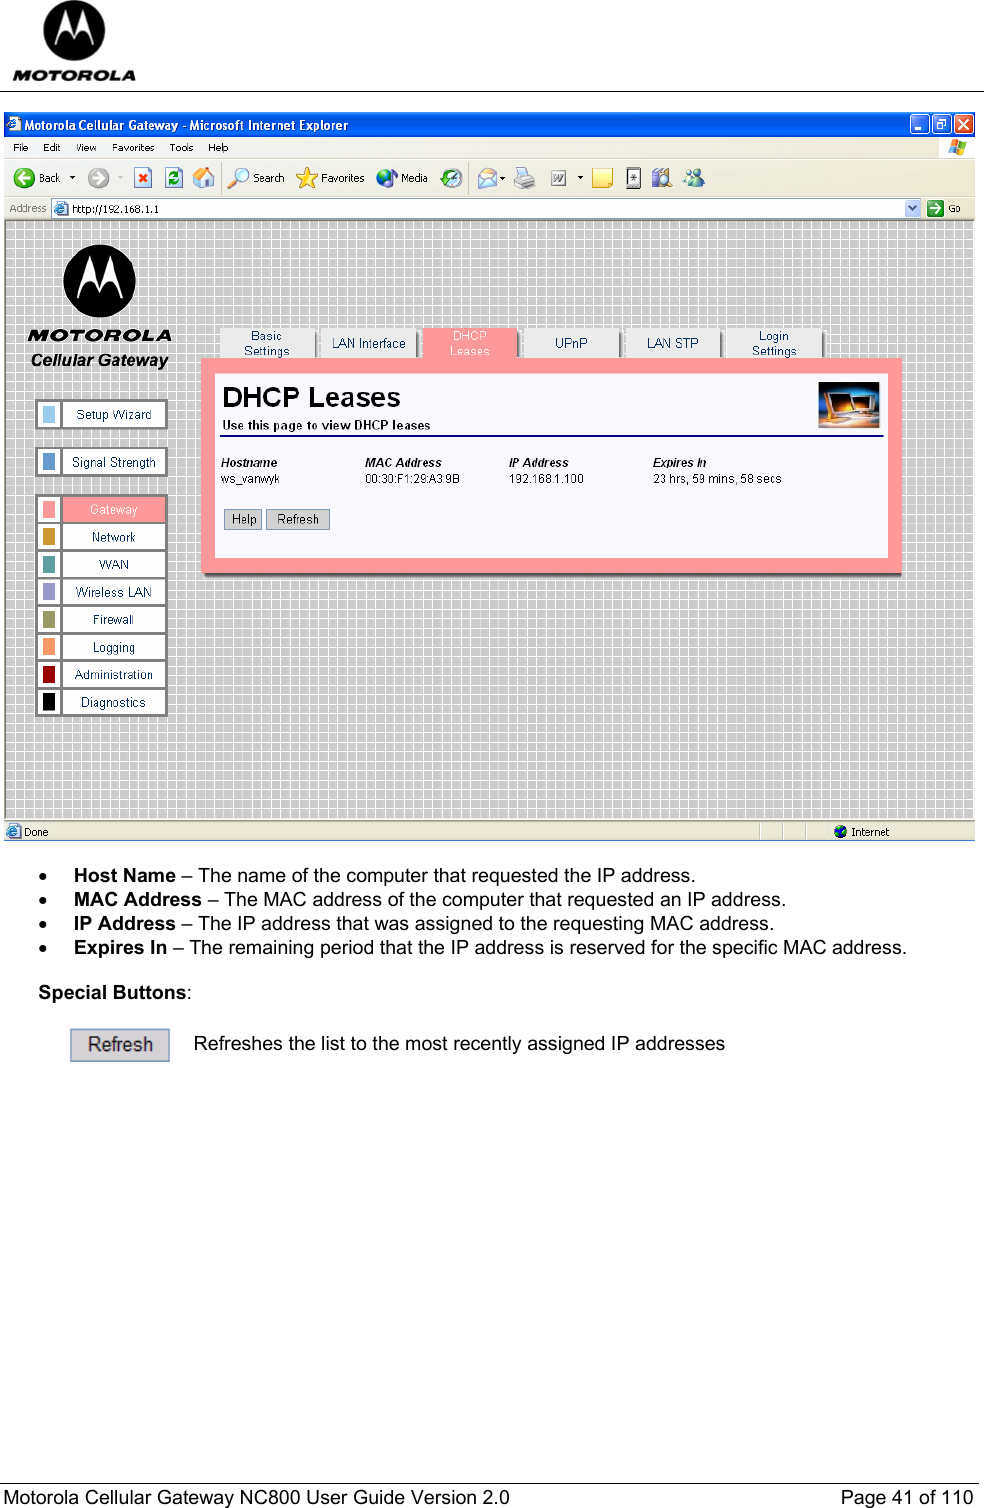  Motorola Cellular Gateway NC800 User Guide Version 2.0     Page 41 of 110    • Host Name – The name of the computer that requested the IP address. • MAC Address – The MAC address of the computer that requested an IP address. • IP Address – The IP address that was assigned to the requesting MAC address. • Expires In – The remaining period that the IP address is reserved for the specific MAC address.  Special Buttons:   Refreshes the list to the most recently assigned IP addresses  